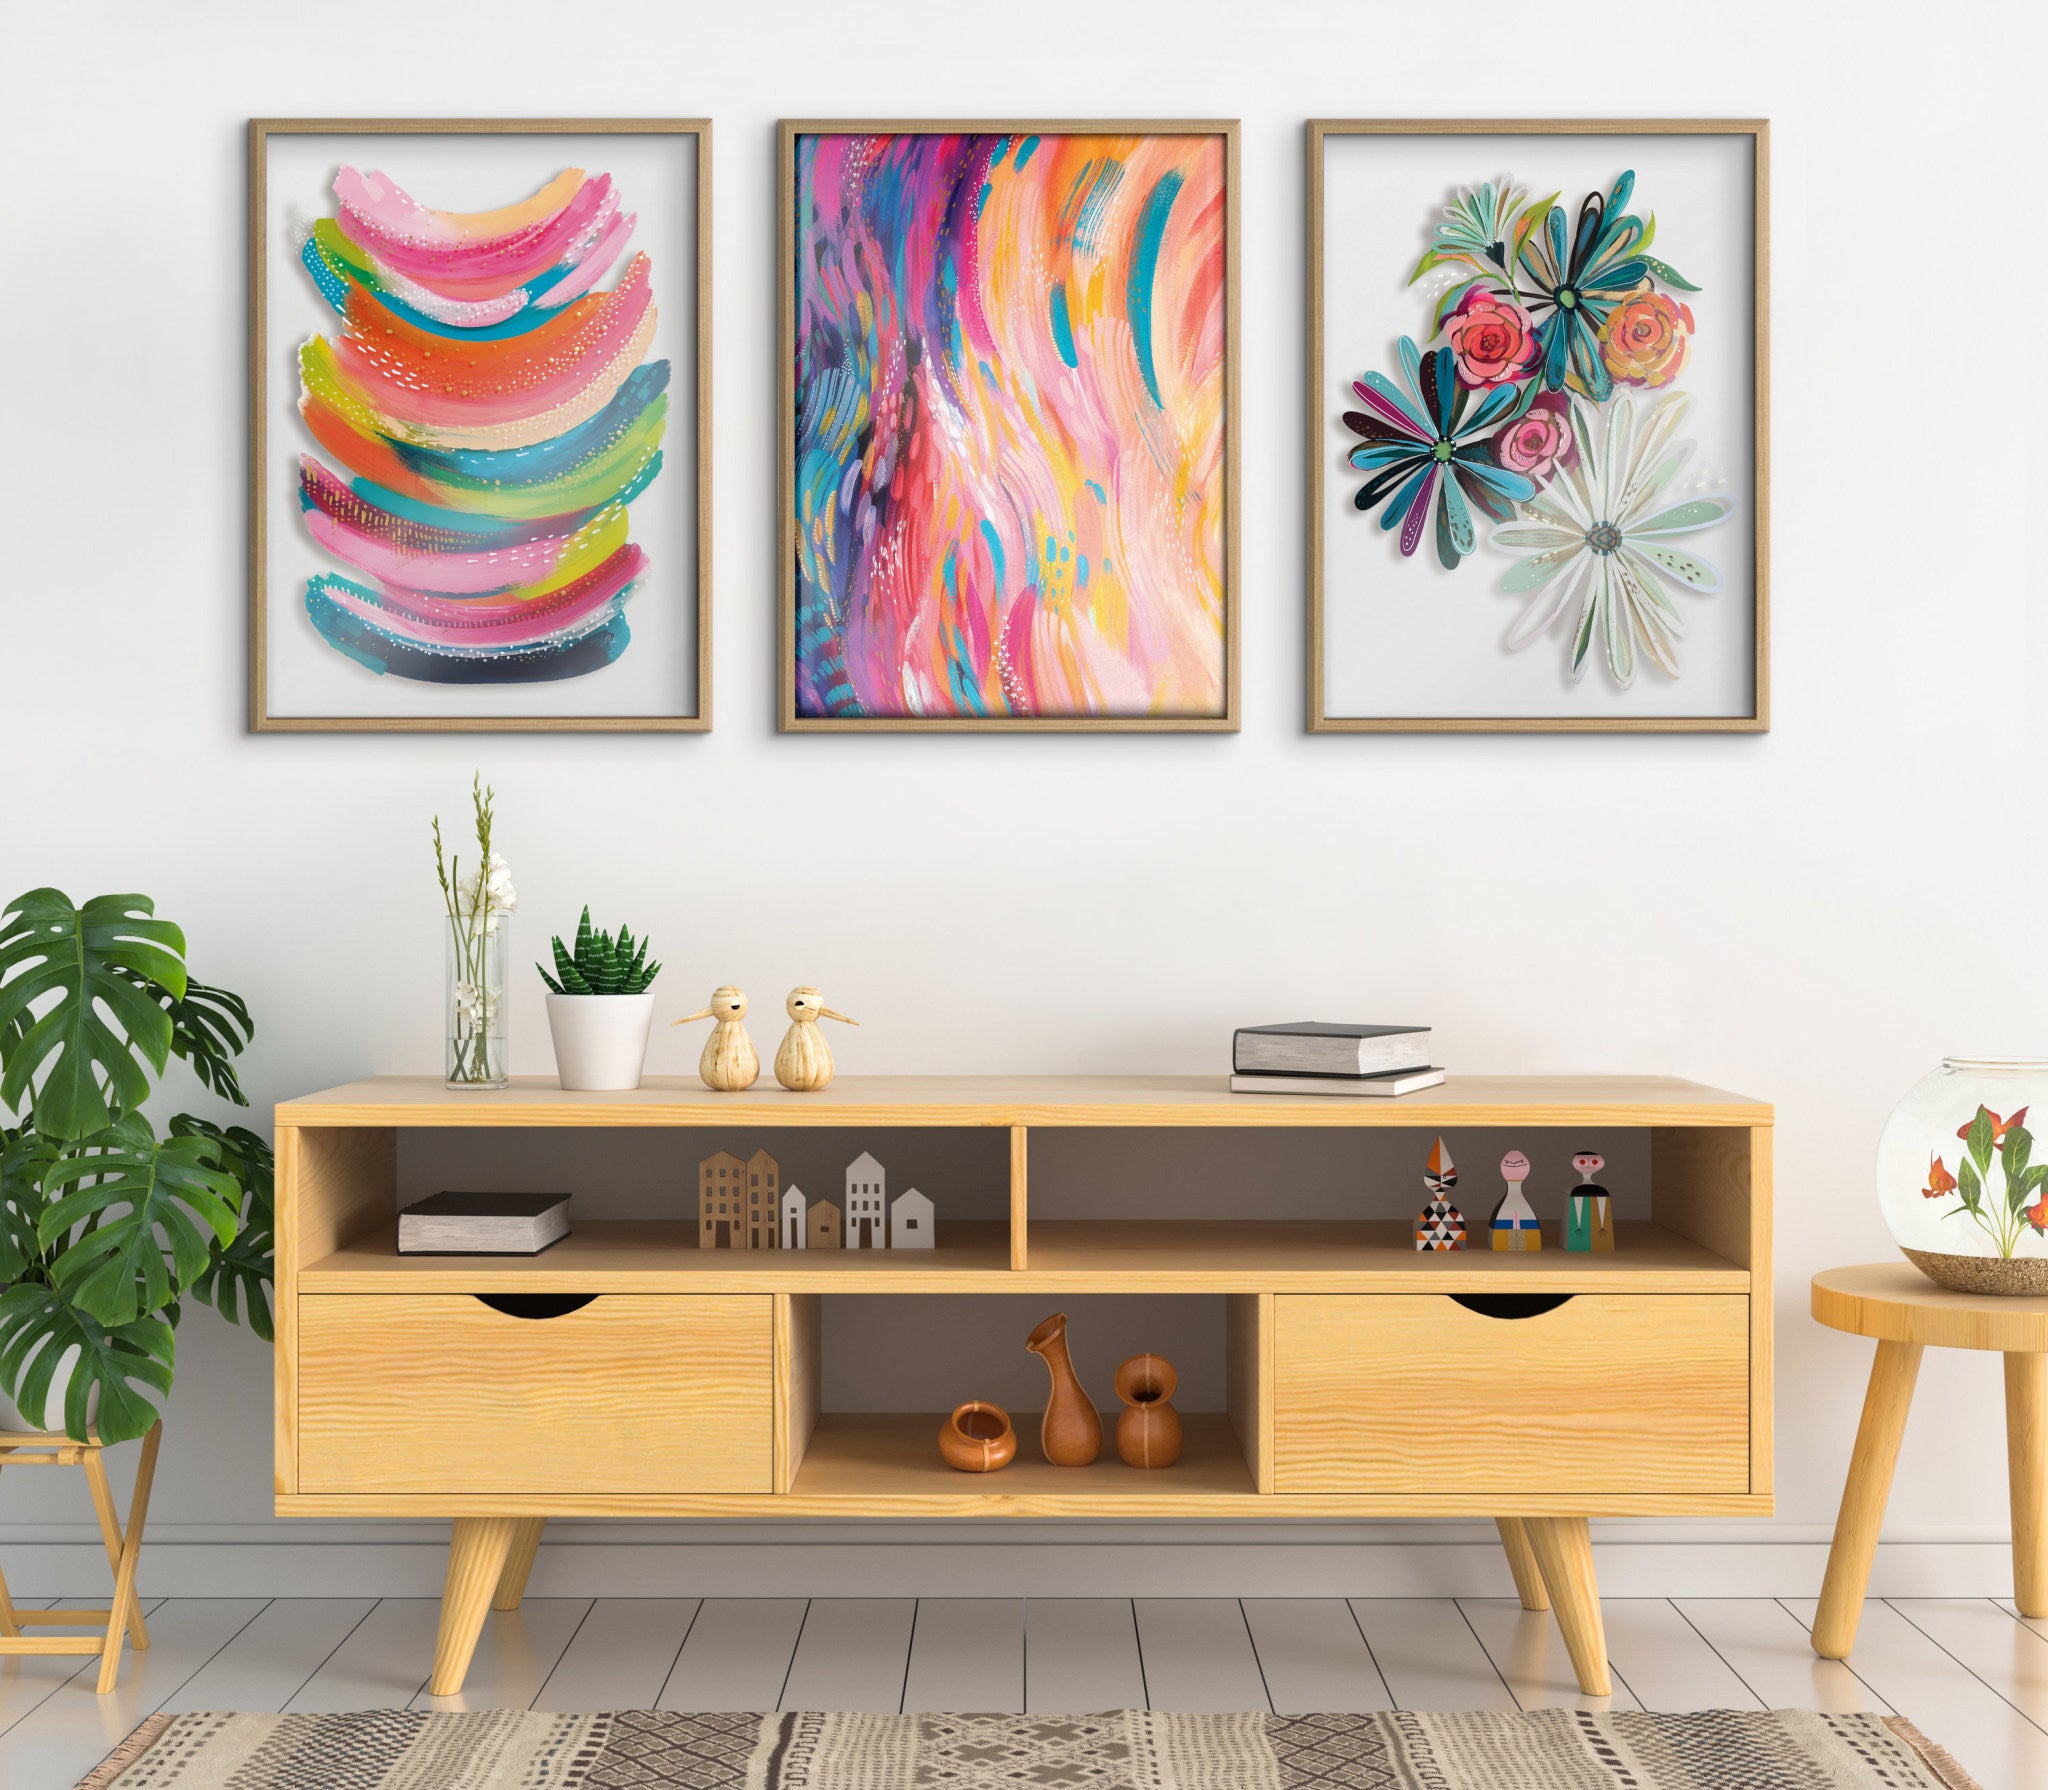 Blake Bright Abstract Framed Printed Art by Ettavee